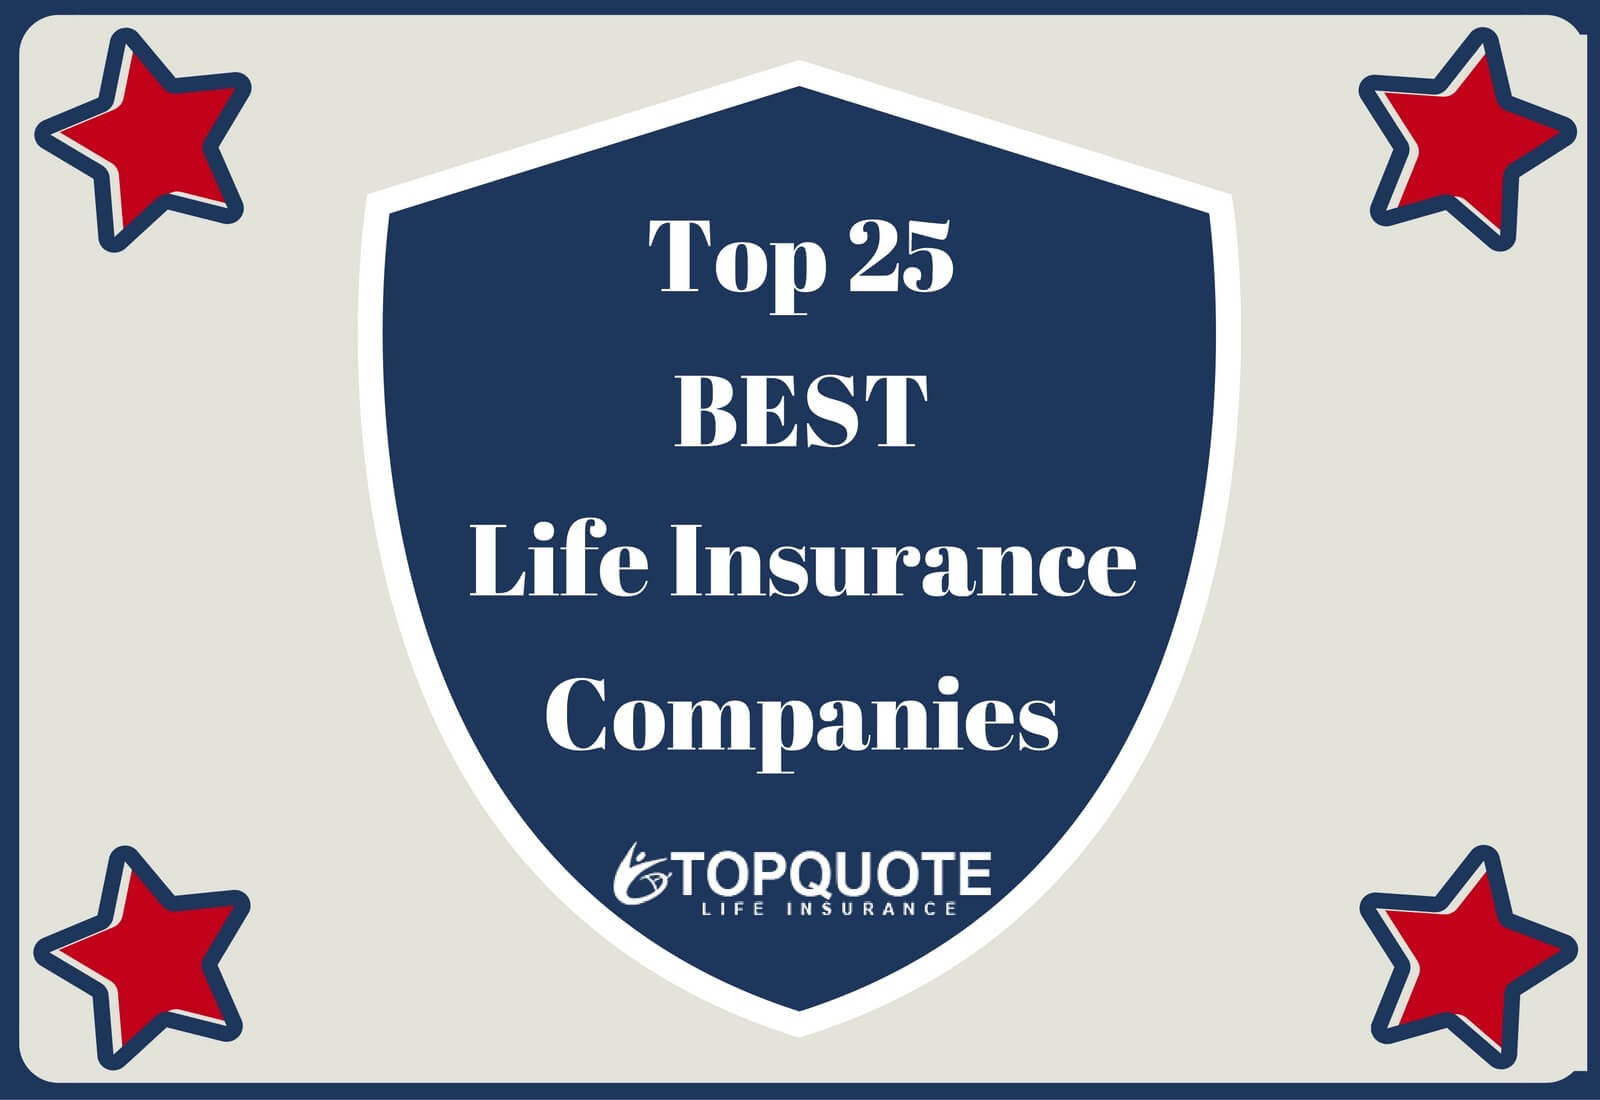 Top 25 Best Life Insurance Companies - Full Review with Sample Rates!